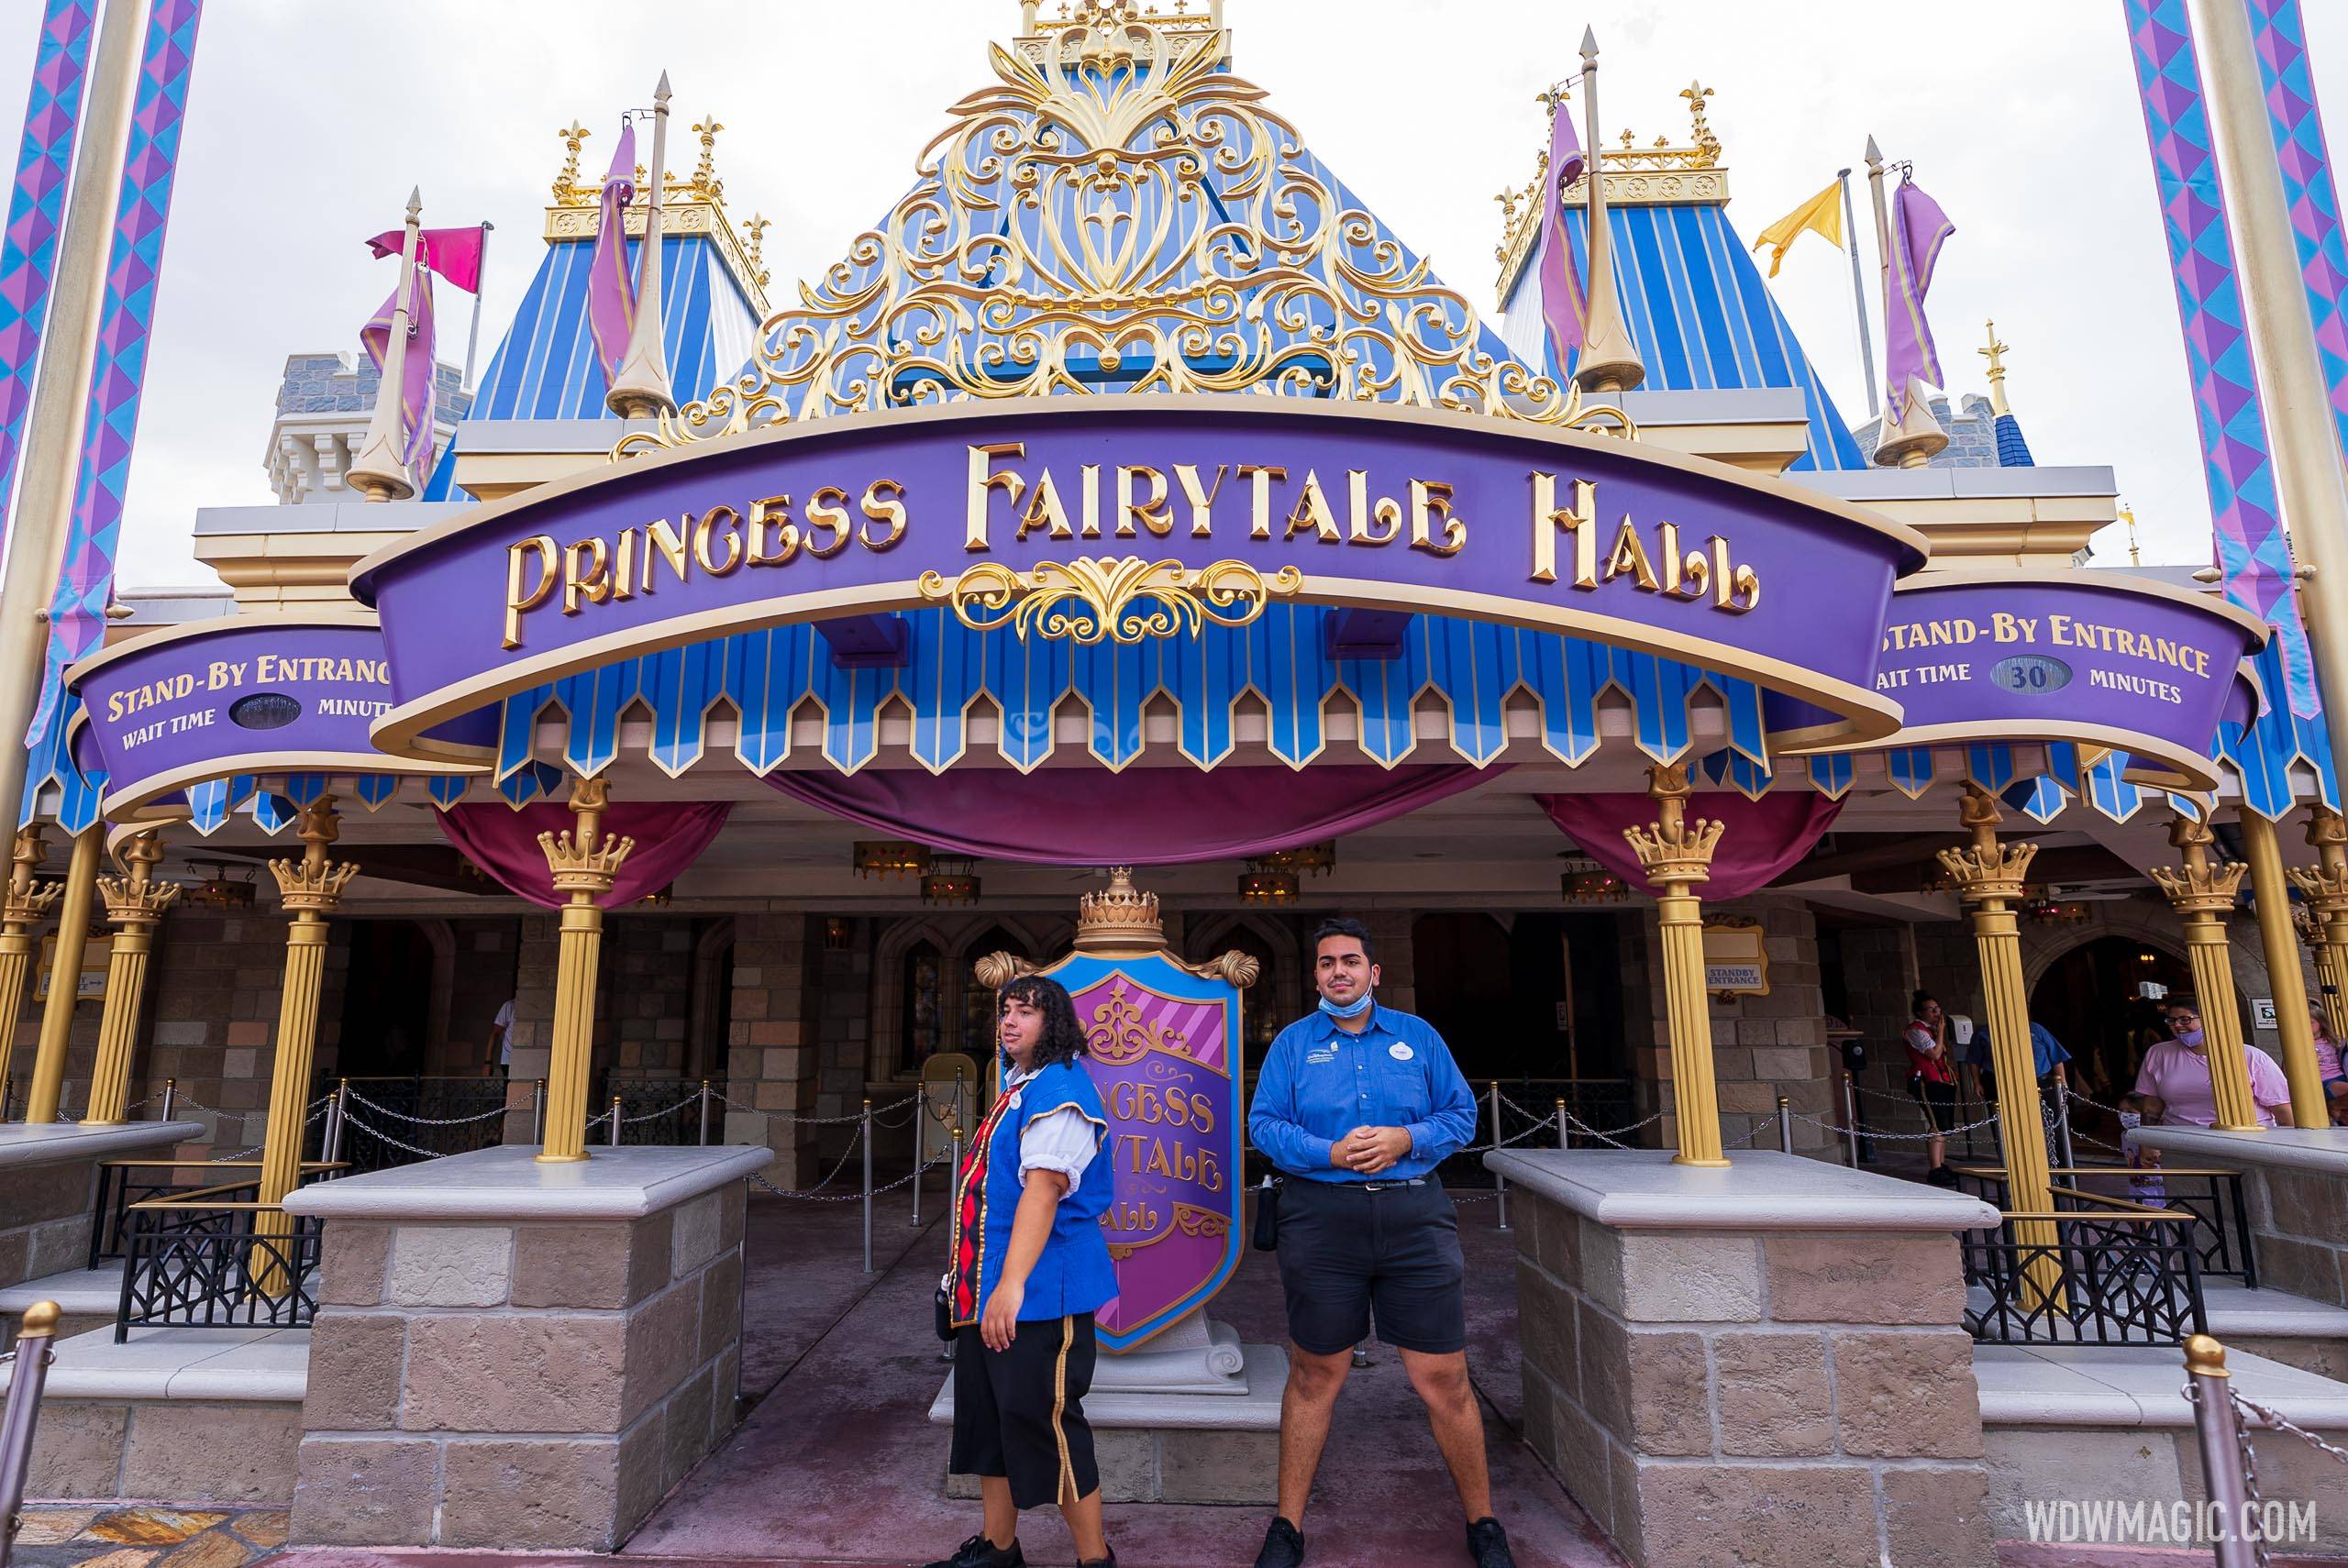 Princess Fairytale Hall reopening